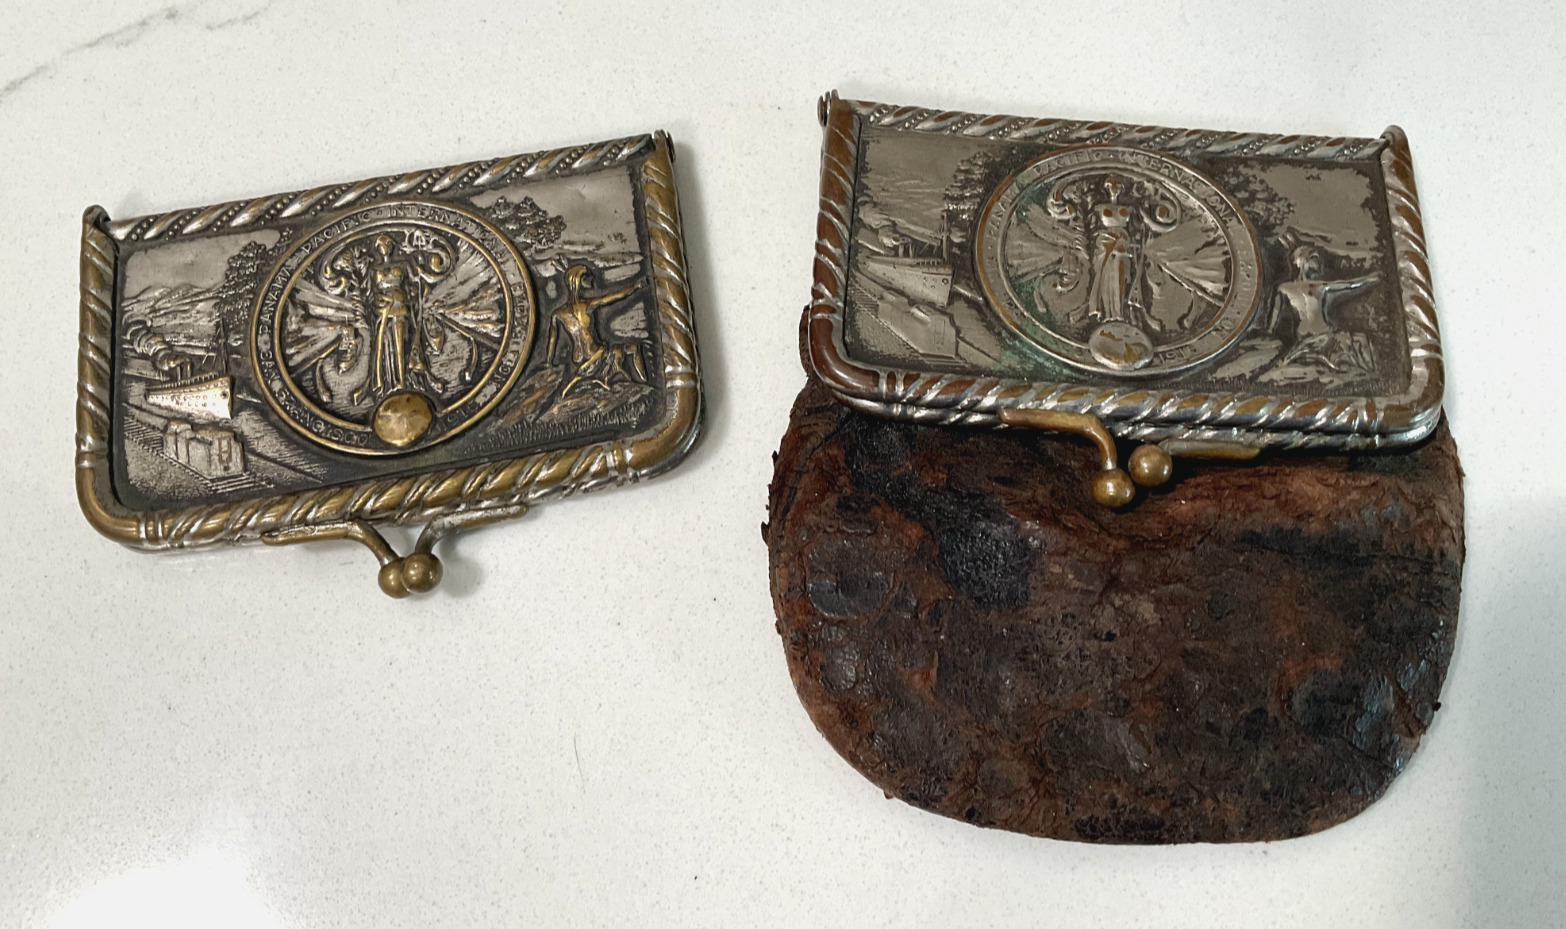 Panama Pacific International Exposition PPIE Lot of 2 Coin Purses 1915